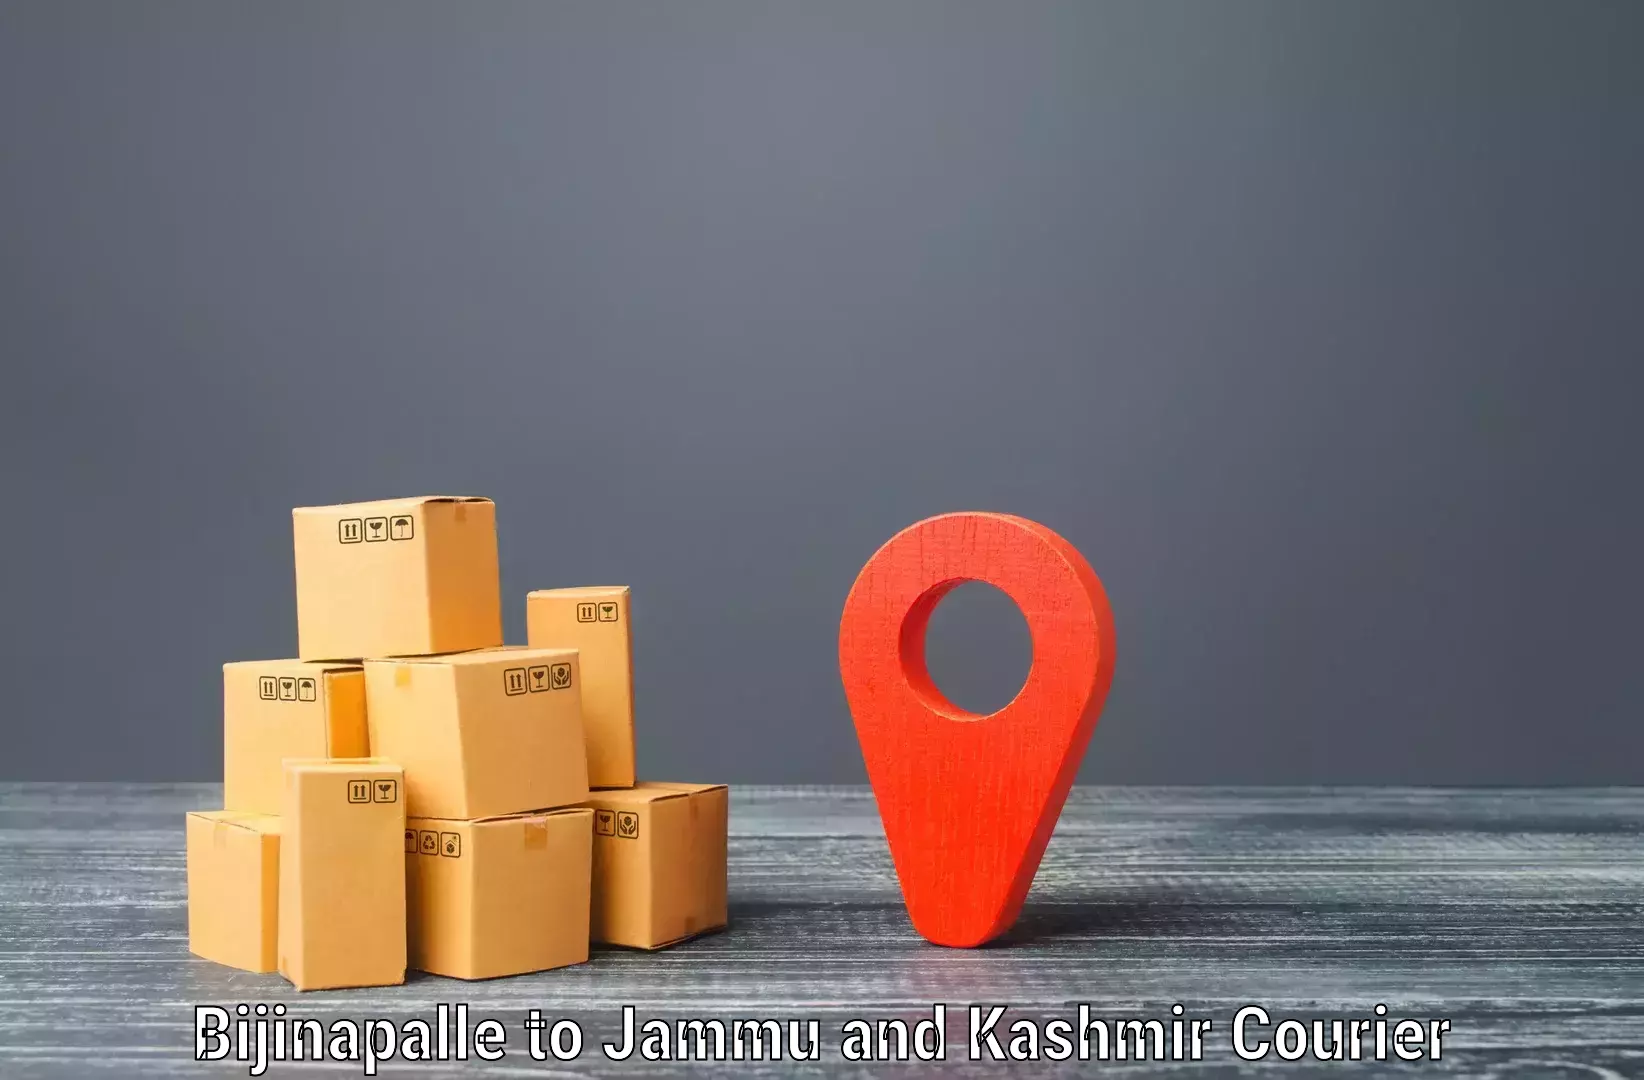 Same-day delivery solutions Bijinapalle to University of Kashmir Srinagar